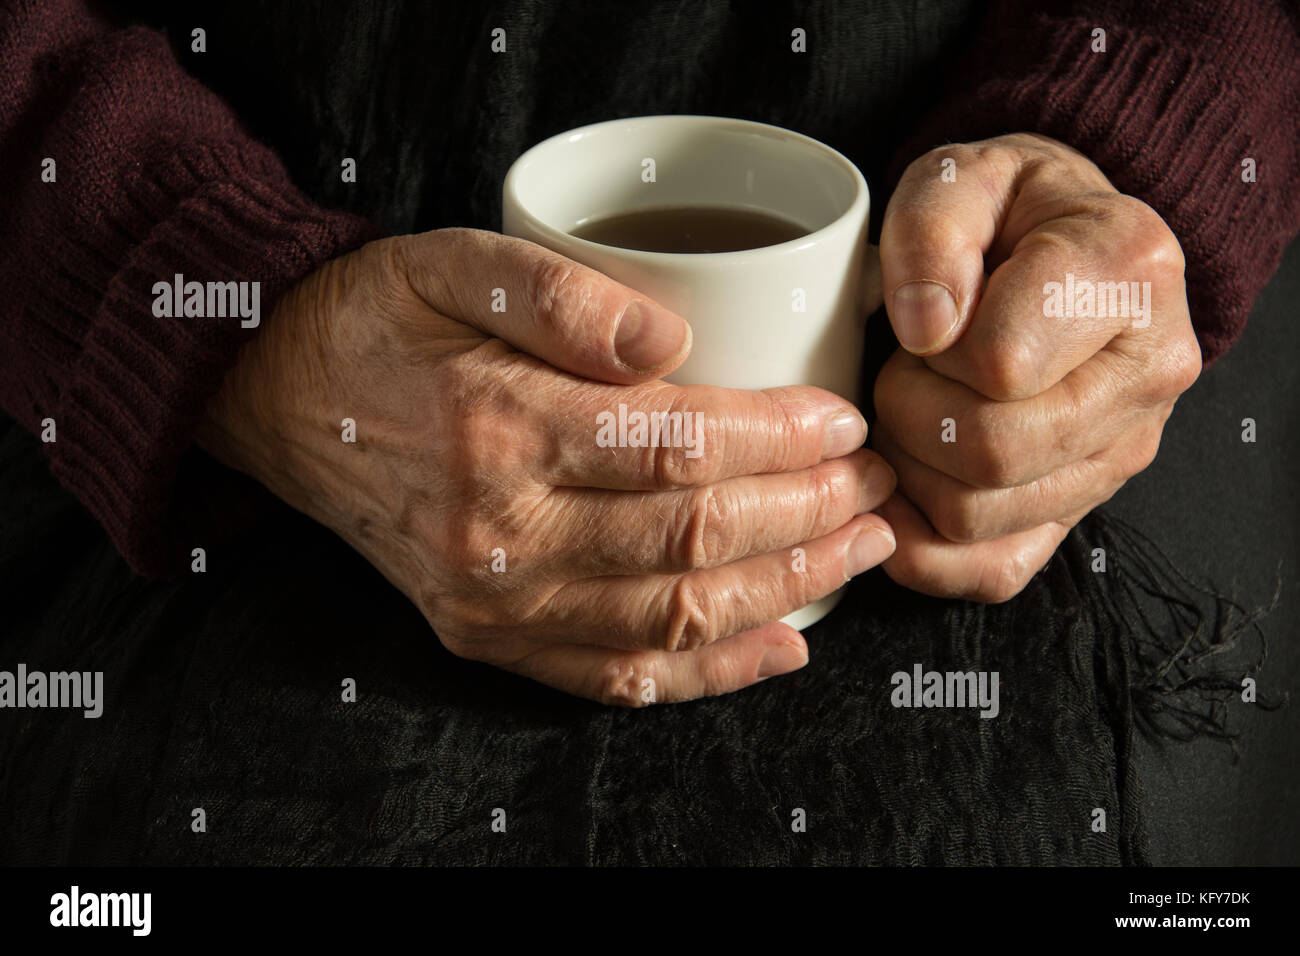 Old woman warming her wrinkled hands with a mug of coffee Stock Photo